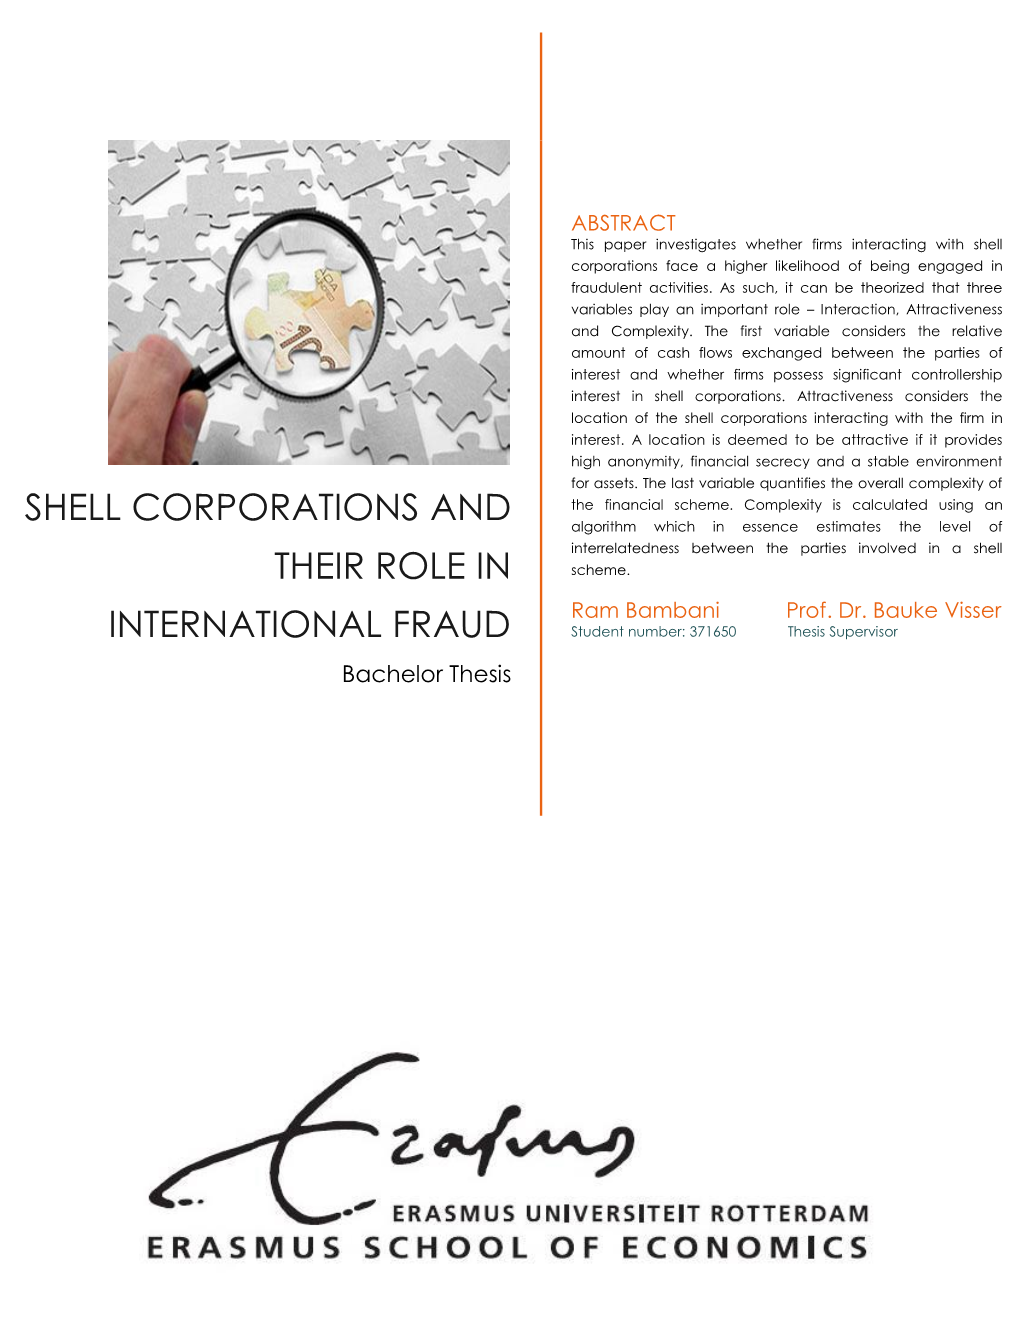 Shell Corporations and Their Role in International Fraud